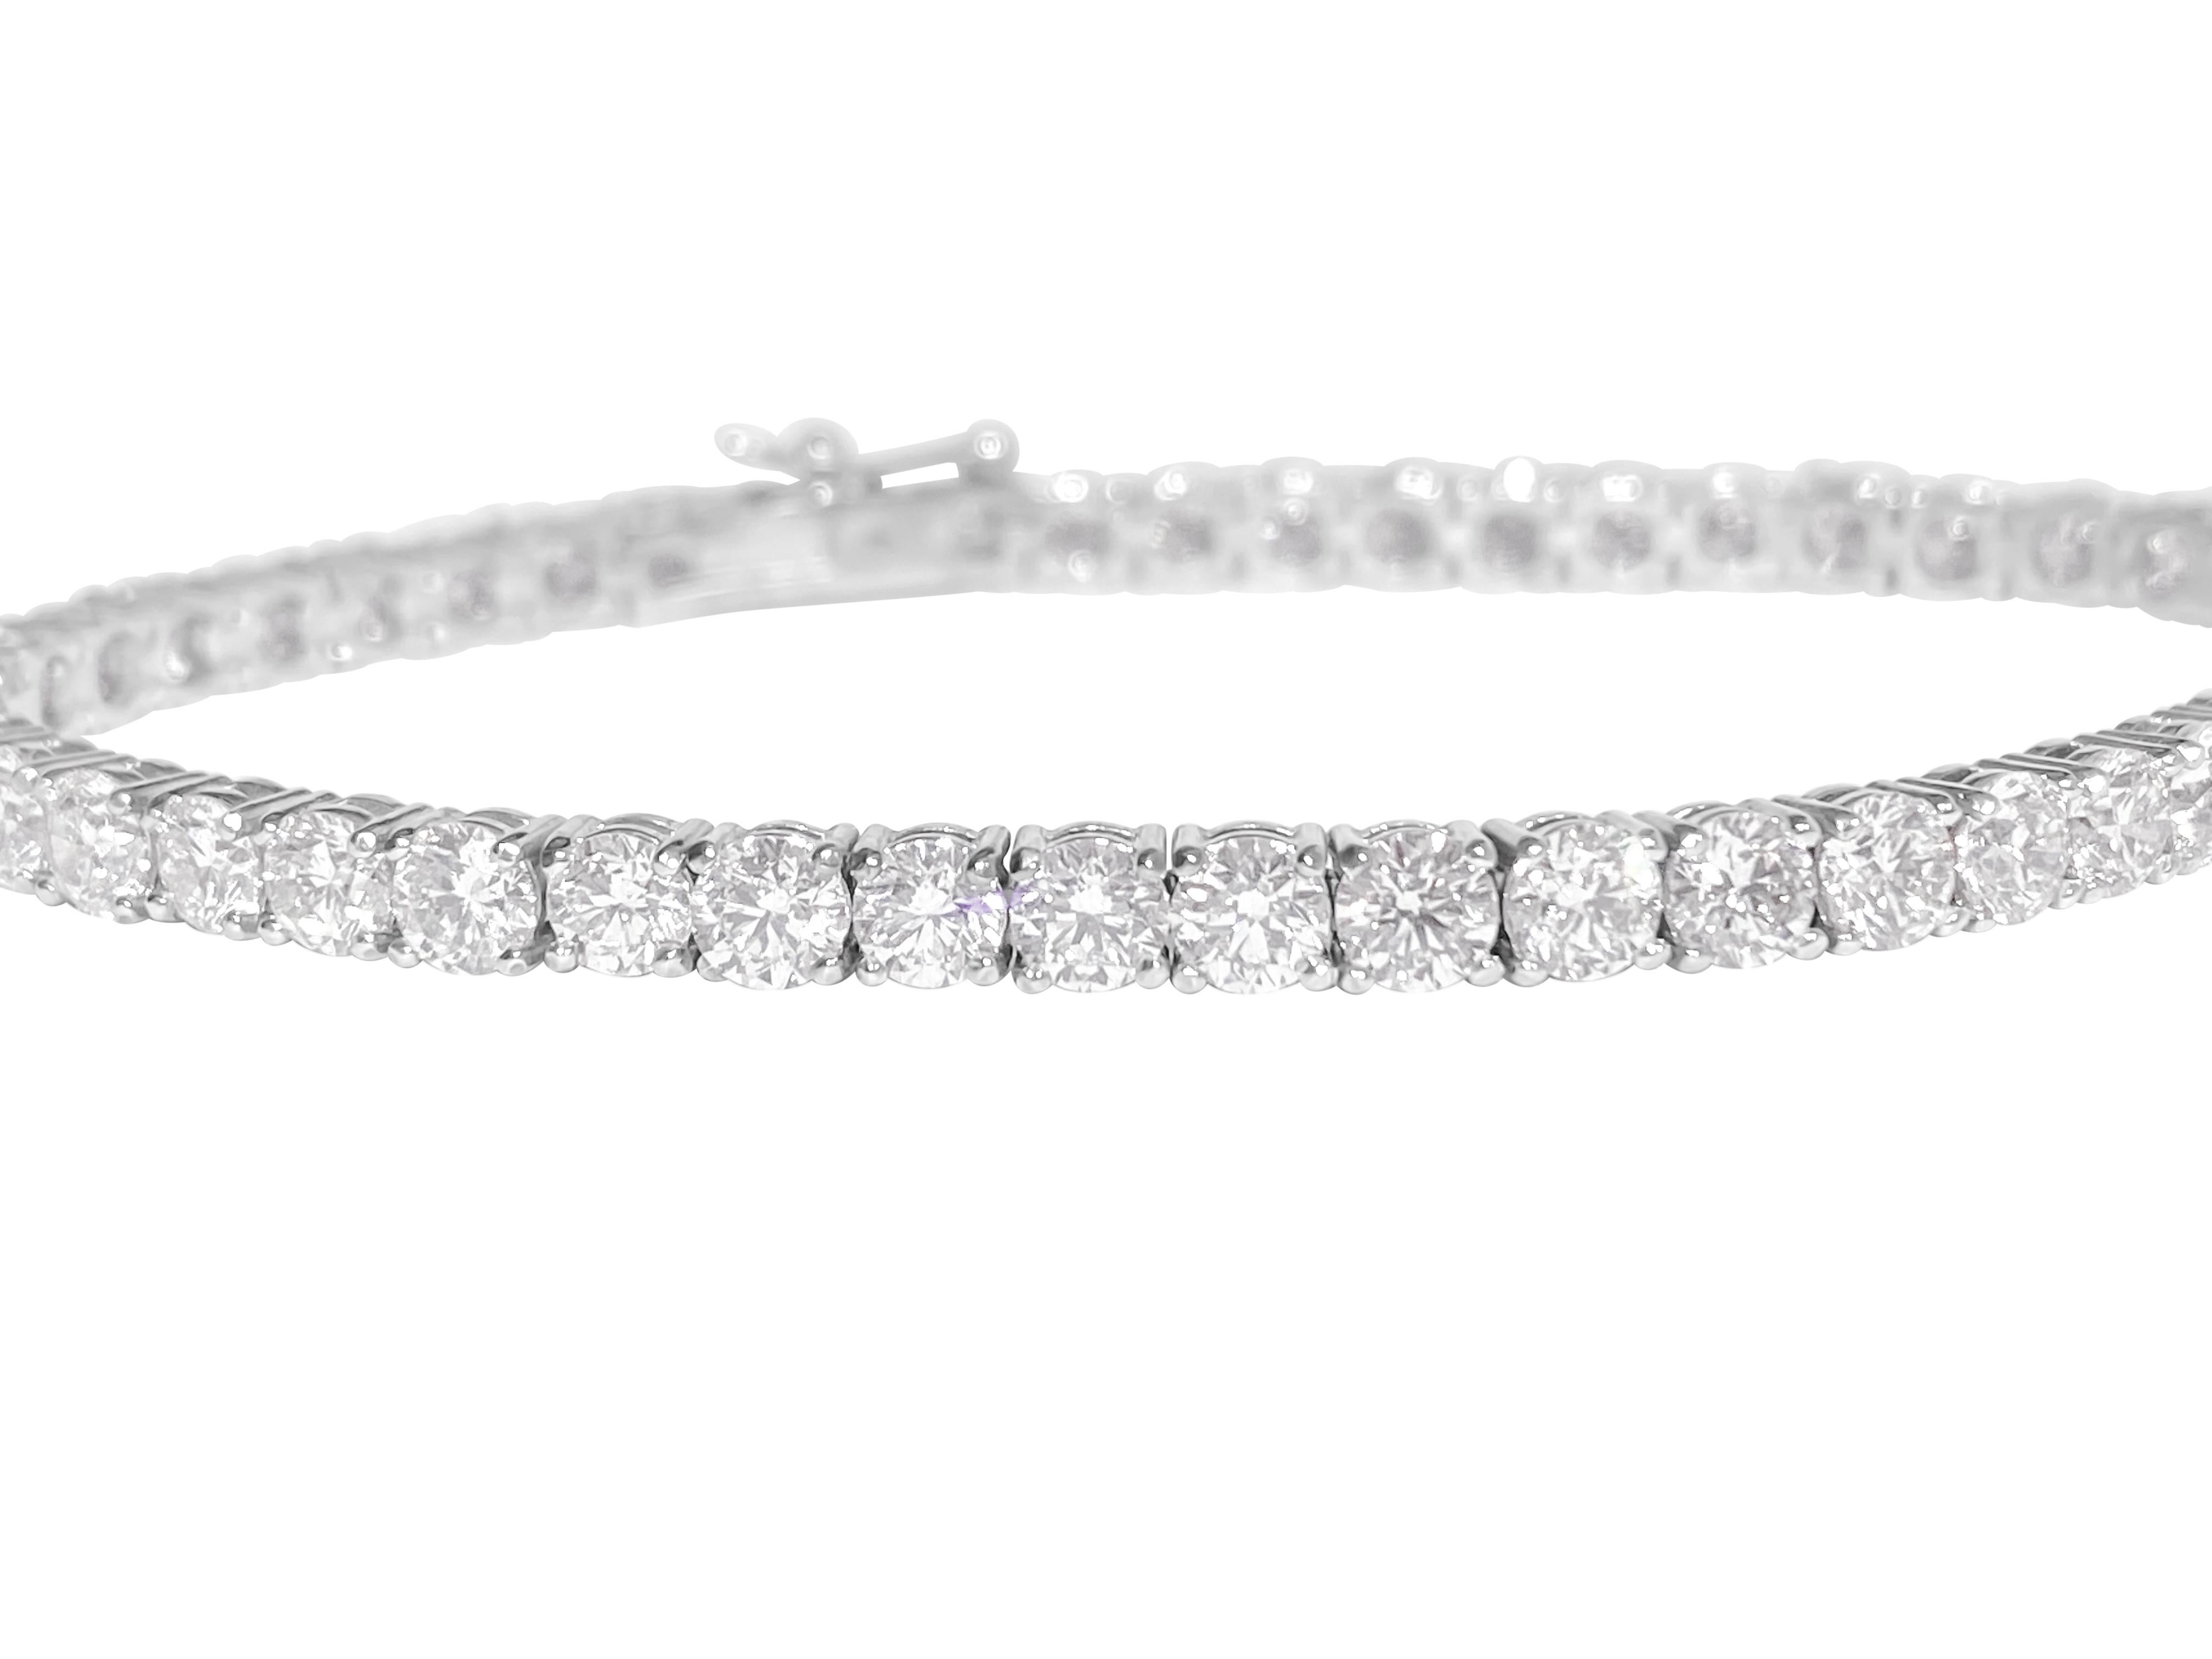 Metal: 14k white gold. 
9.10 carat diamonds total. Round brilliant cut. VVS clarity. 
100% natural earth mined diamonds
20 pointer diamonds.
Setting: prongs
Style: Tennis bracelet.
Tongue hook. 
10.73 grams. 7 inches. 

Brand new custom made tennis